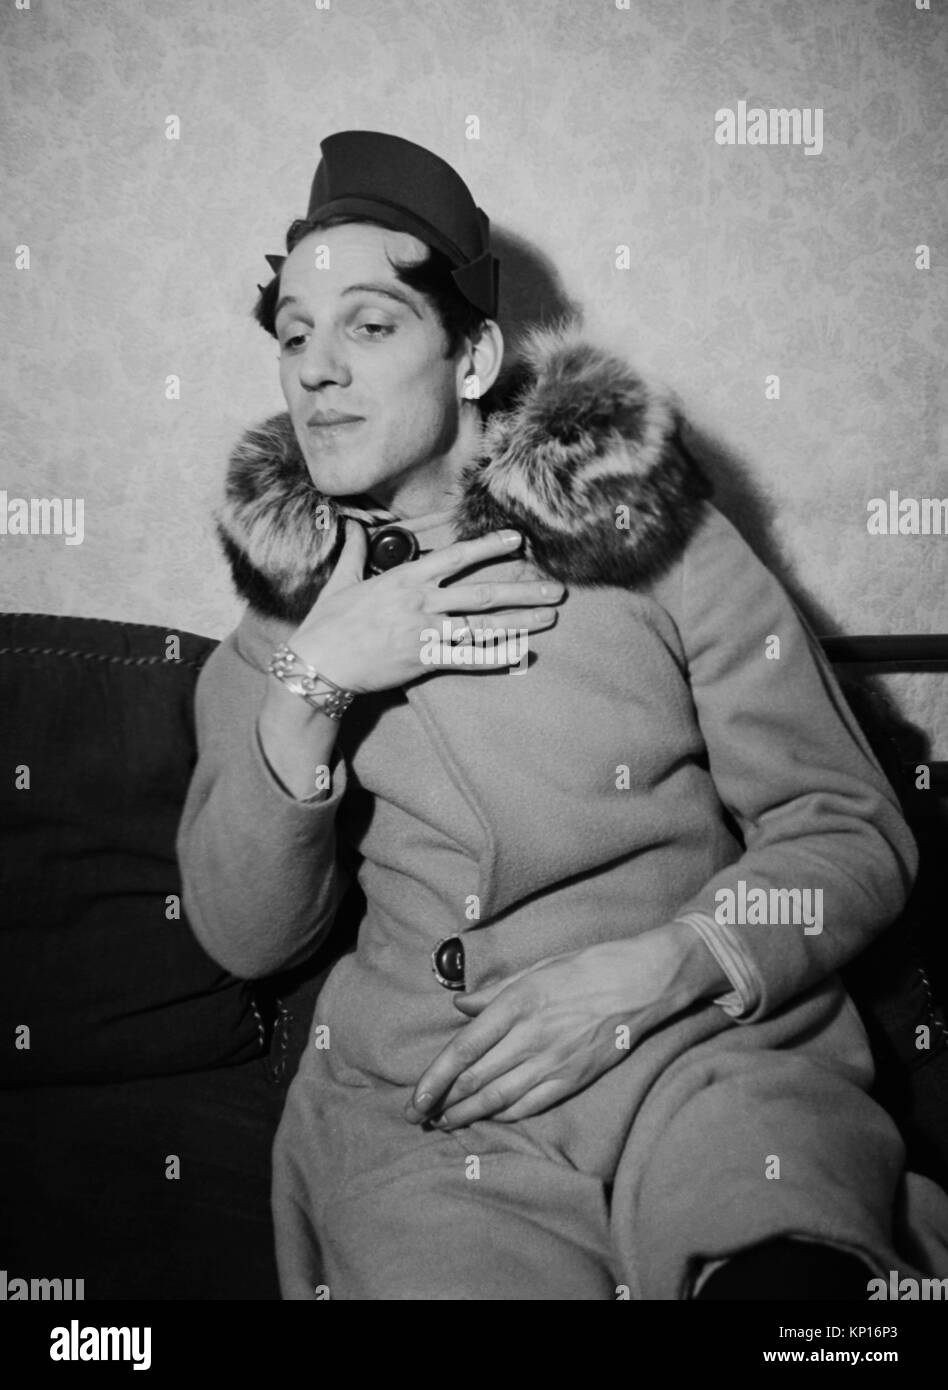 1937 Man in drag and Clack Gable lookalike amateur dramatics photoshoot Stock Photo